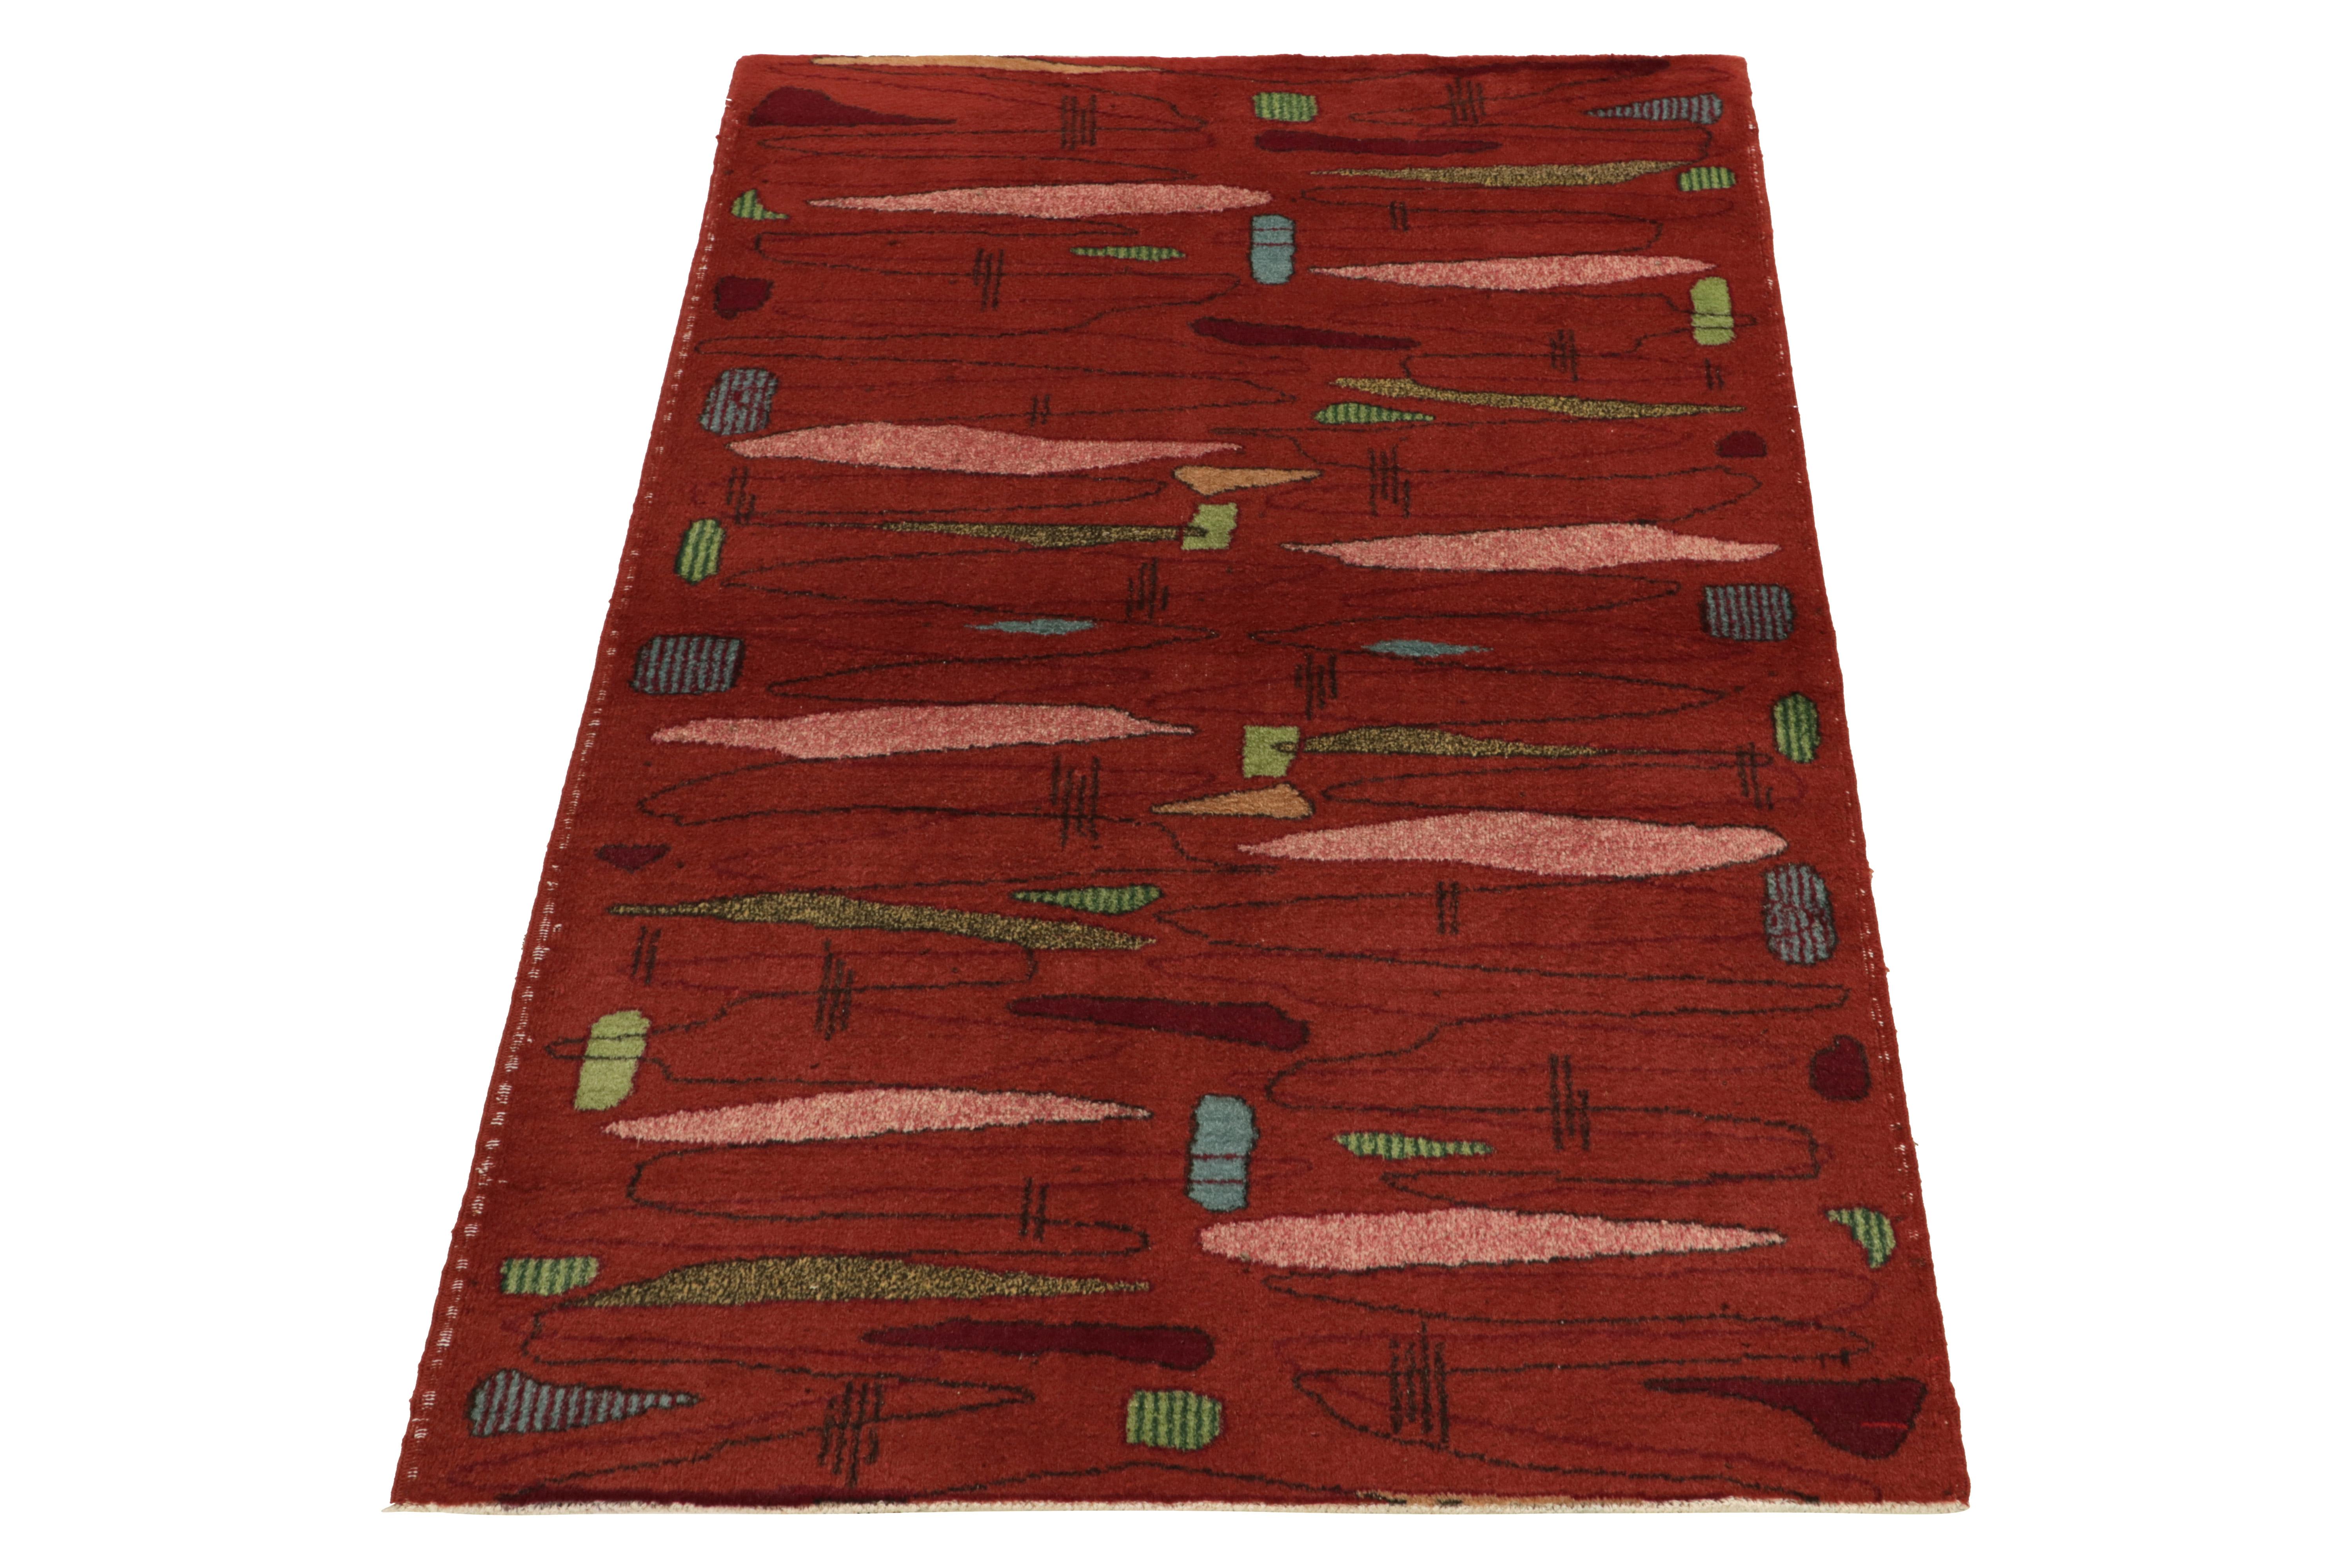 A bold 3x7 Art Deco vintage rug from Rug & Kilim’s growing Mid-Century Pasha Collection. Originating from Turkey circa 1960-1970 among the iconic mid-century modern carpets believed to hail from a revered Turkish atelier.

This cherished